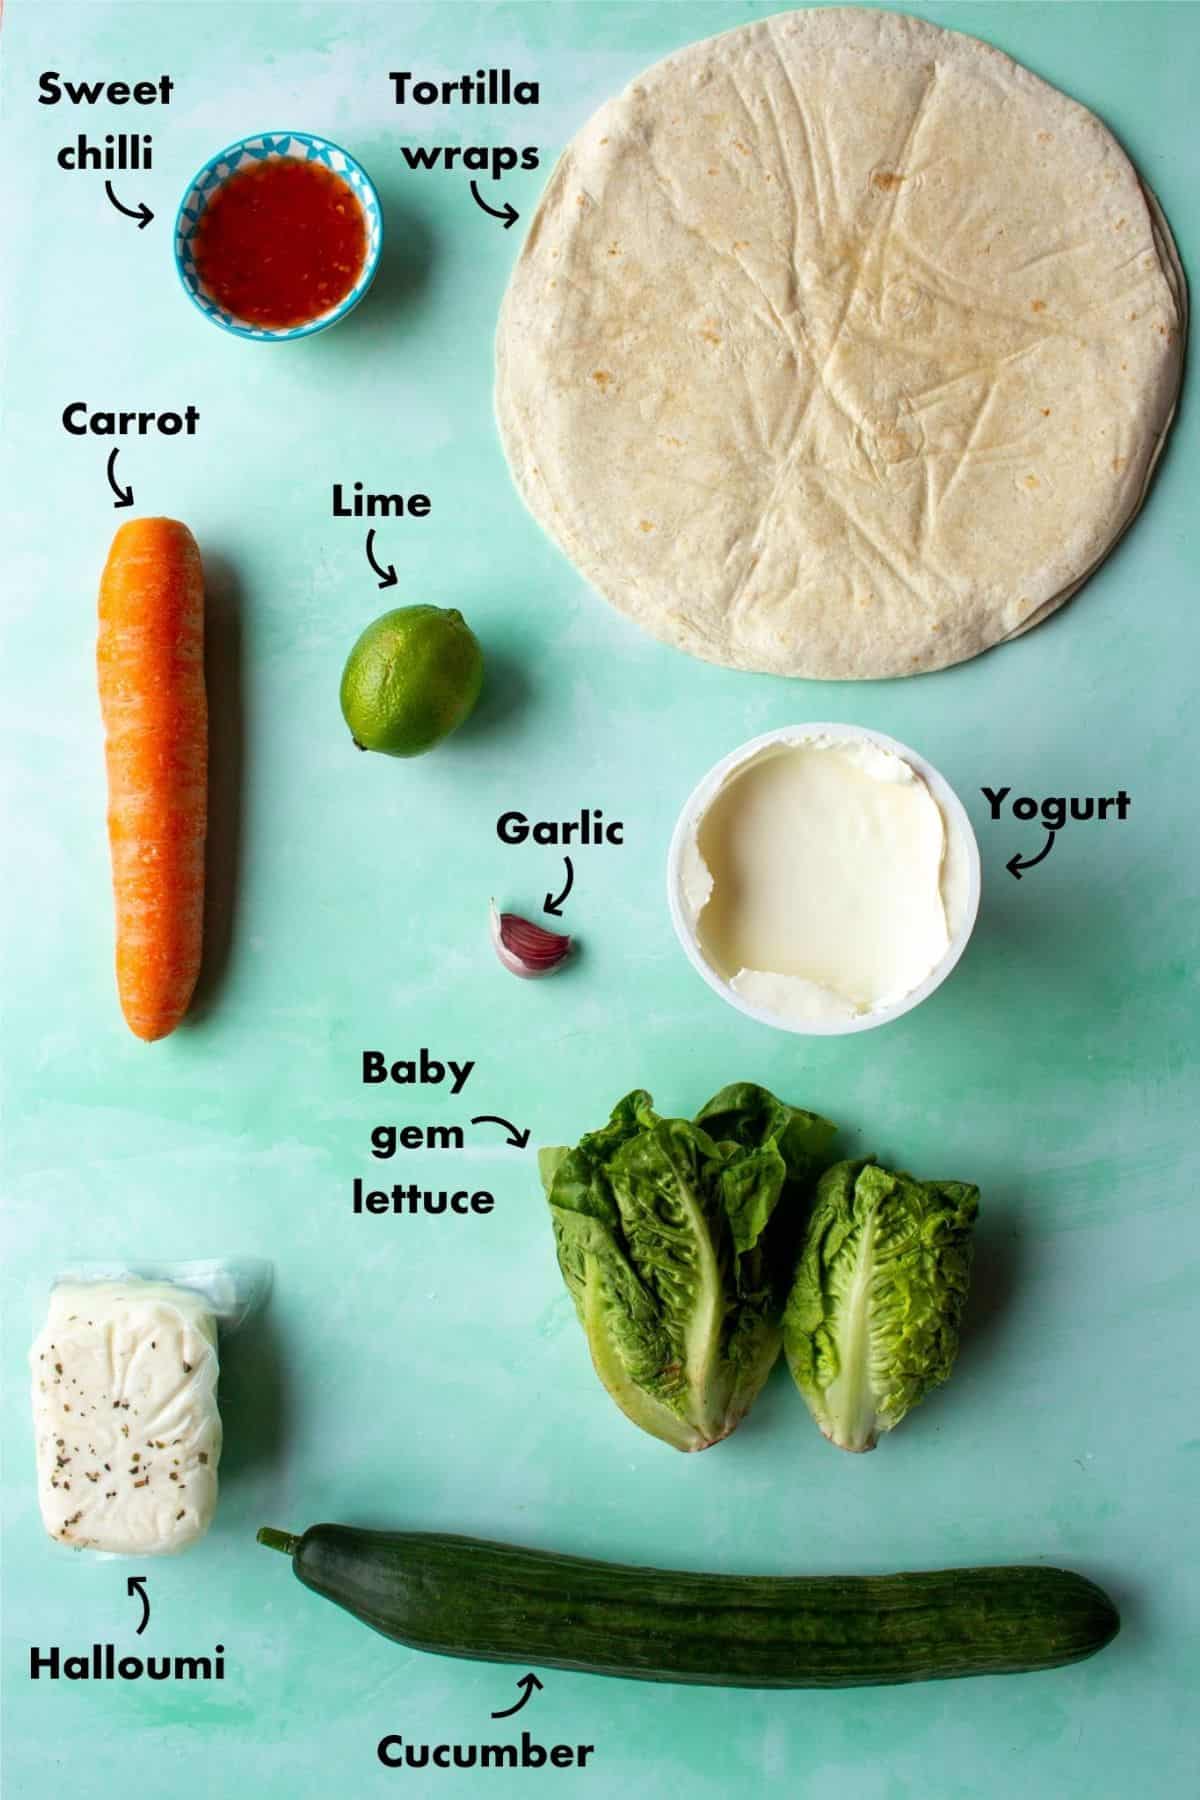 Ingredients to make the Halloumi Wrap laid out on a pale blue background and labelled.